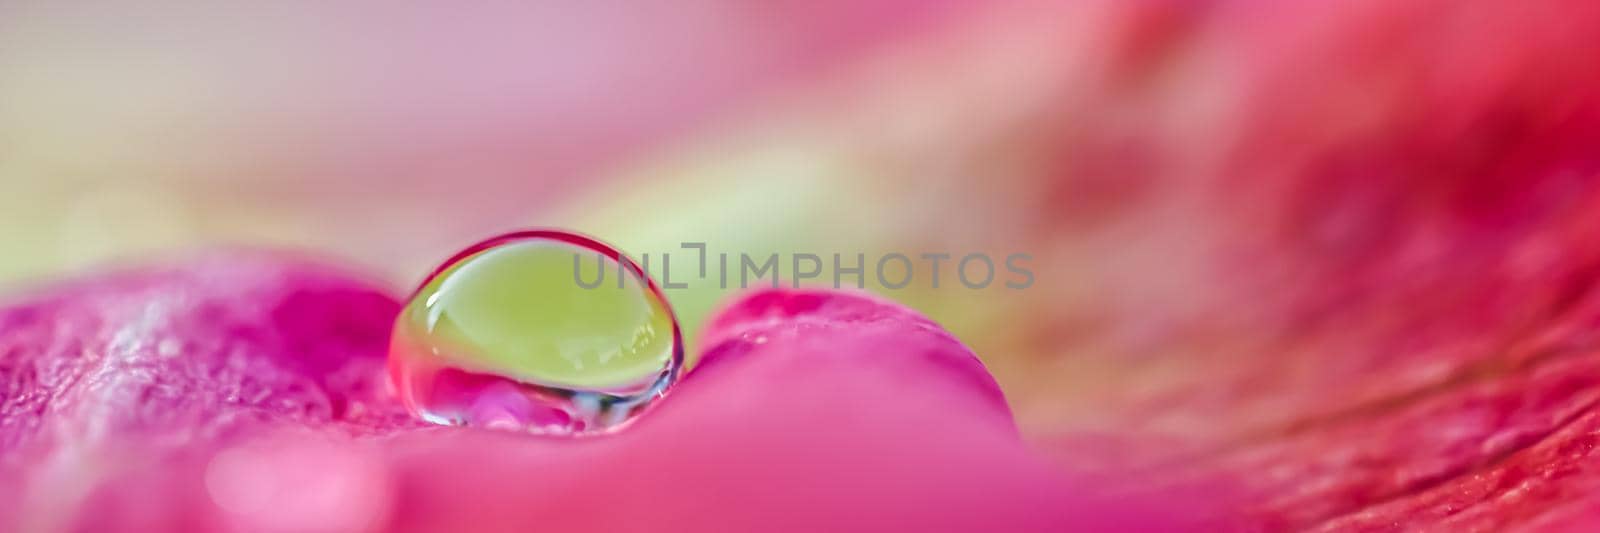 Red yellow rose petals with drops of water. Aromatherapy and spa concept. Blurred floral background by Olayola